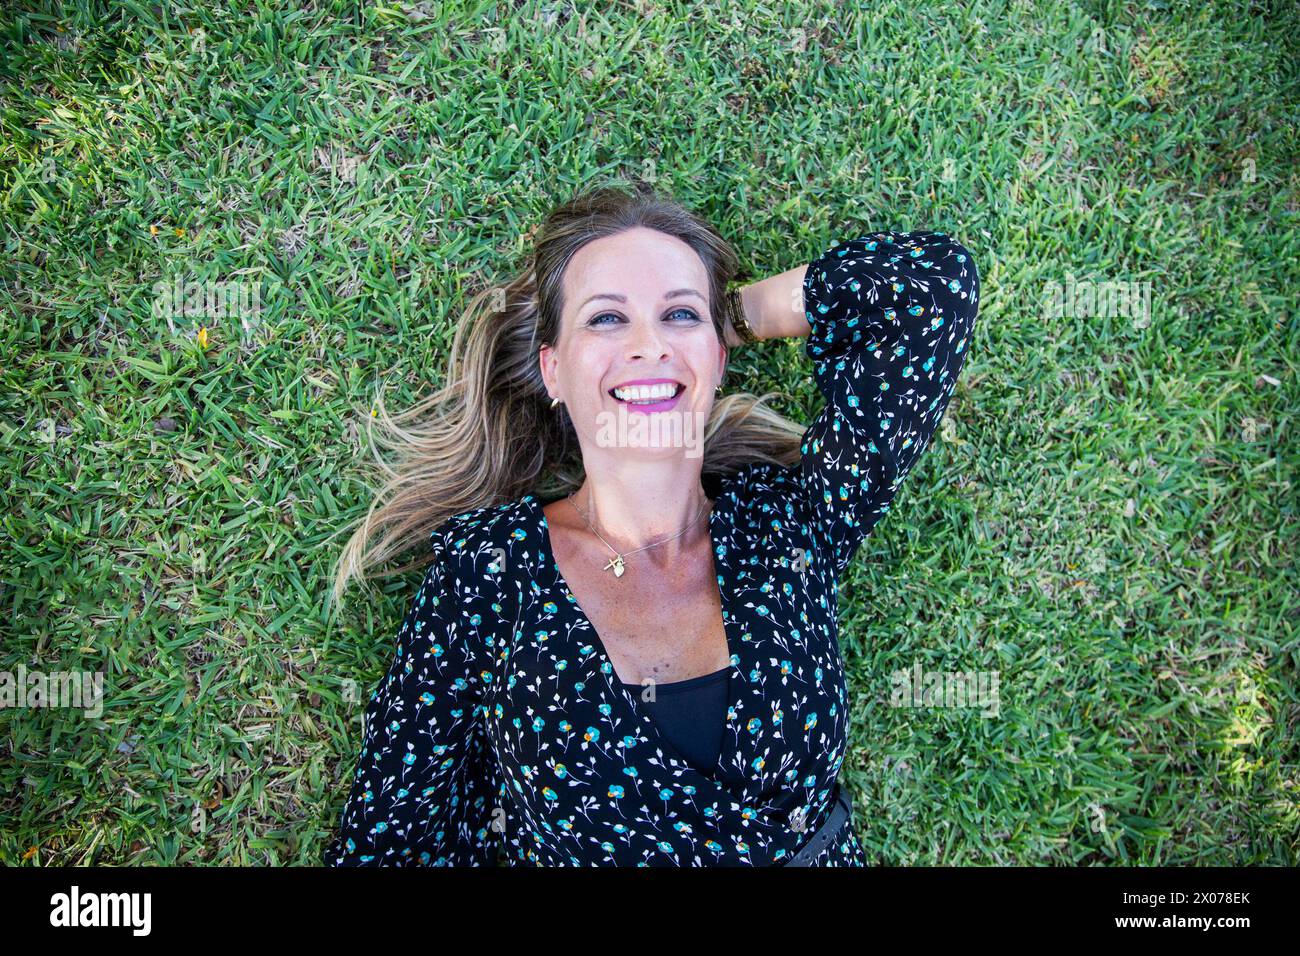 A woman is laying on the grass with smile on her face. Stock Photo